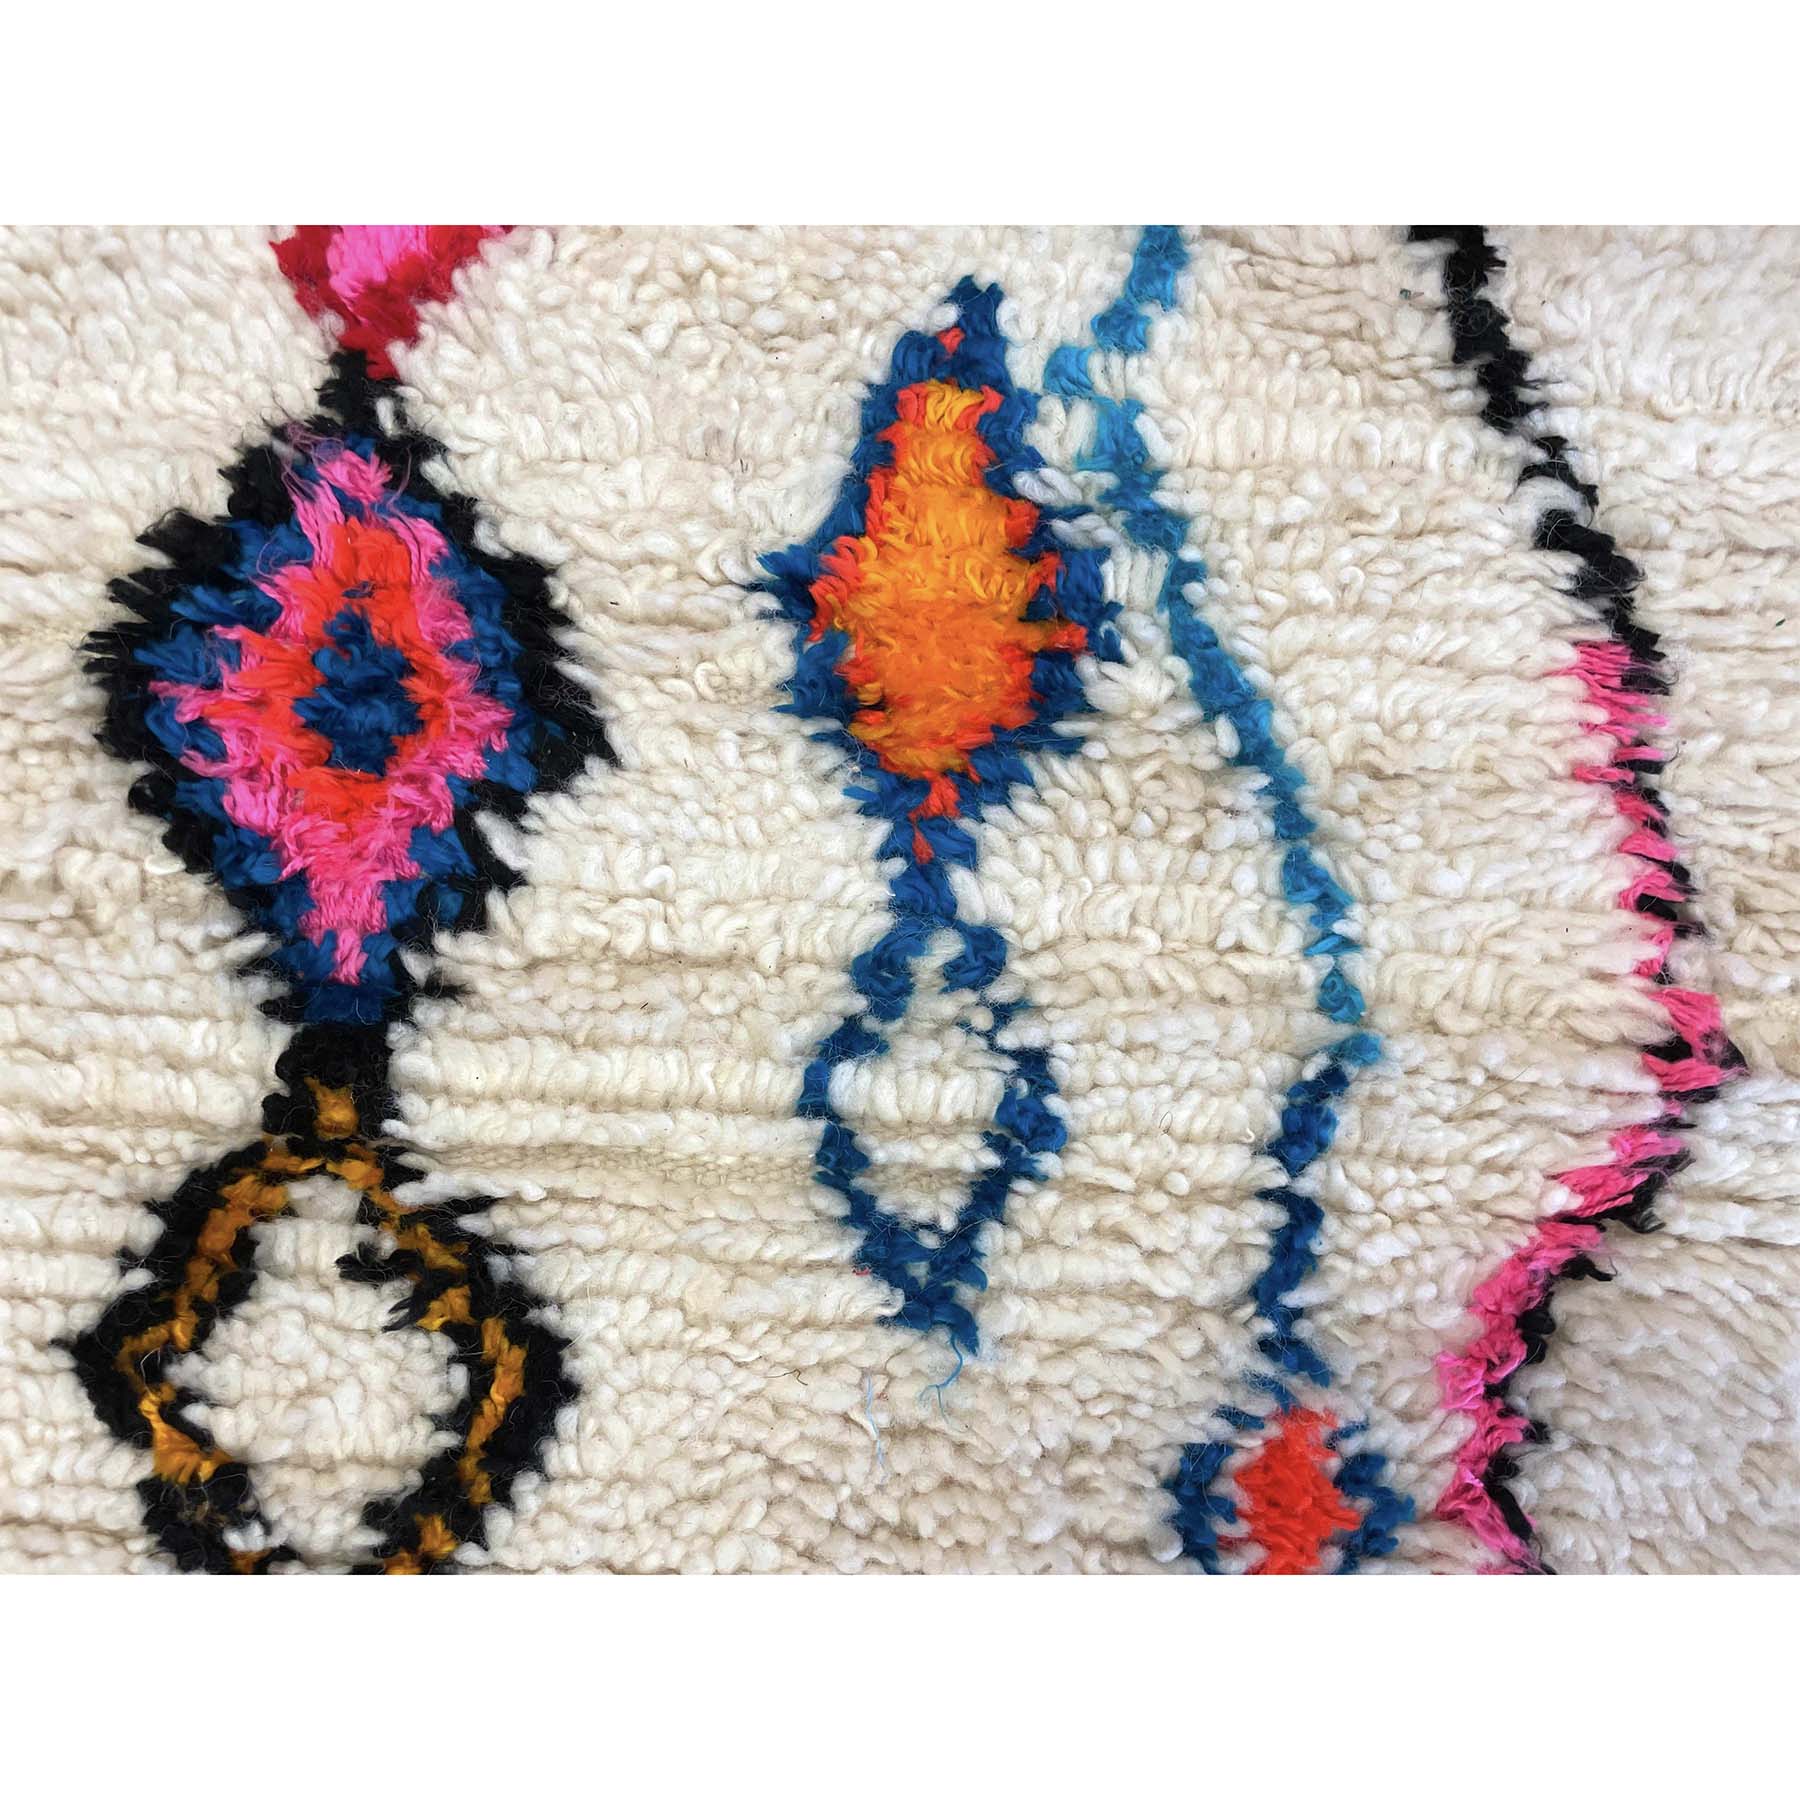 White Moroccan throw rug with details in blue, pink, orange, red, and black - Kantara | Moroccan Rugs